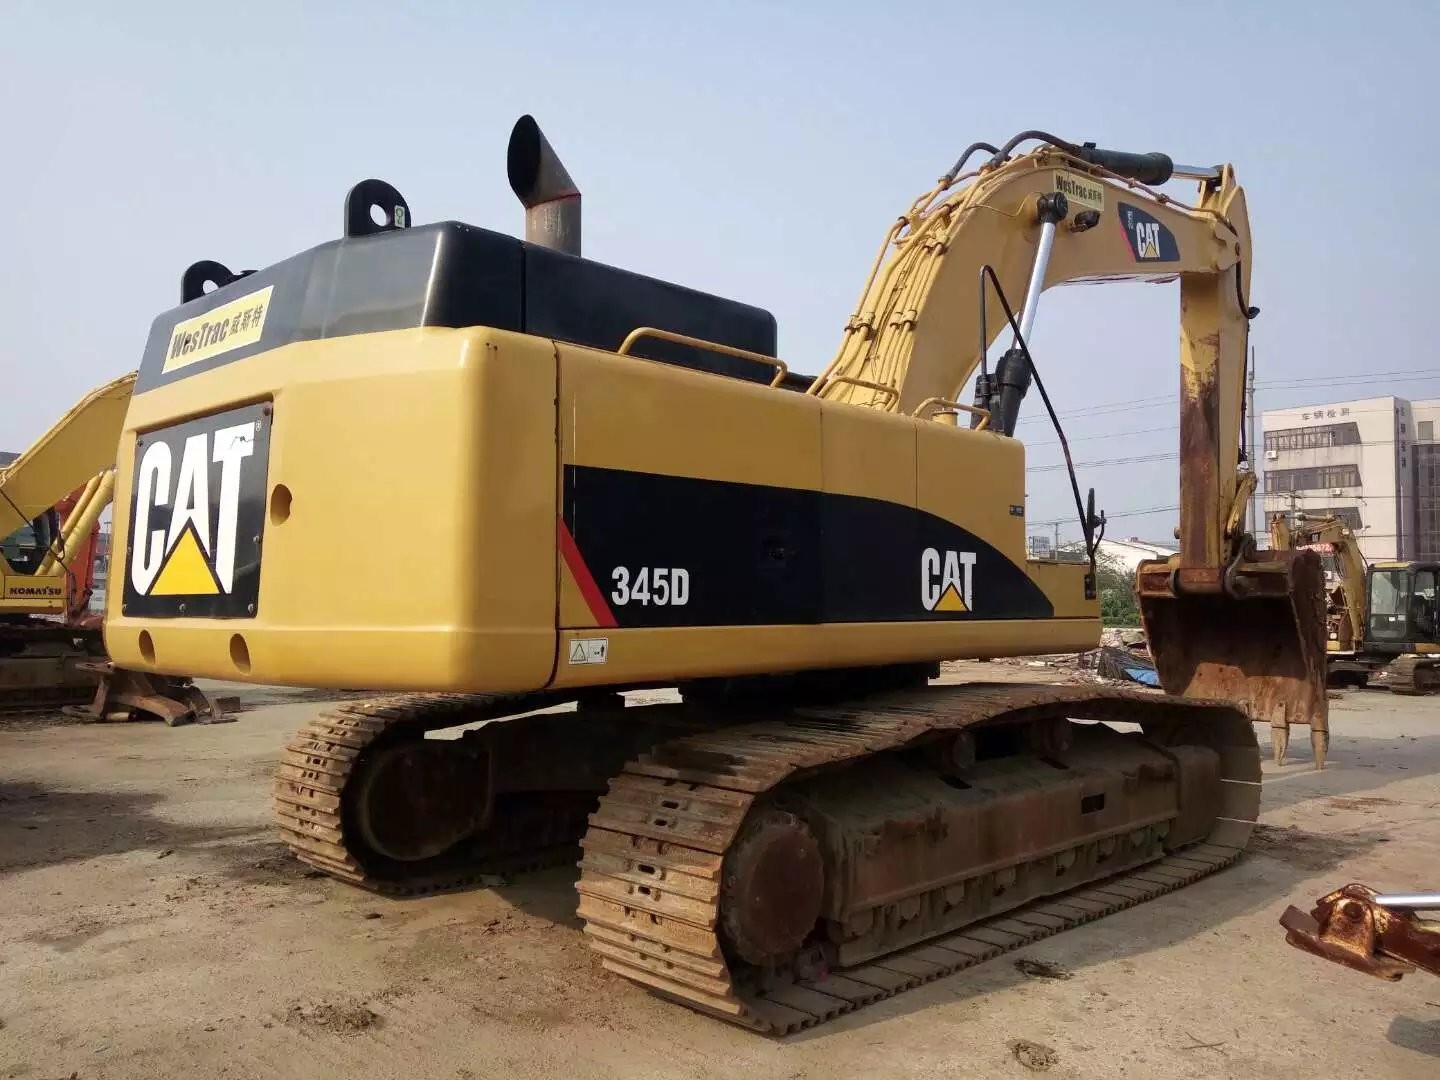 Quality original japan Used Caterpillar 345D Excavator for sale/Second hand cAT 345D crawler excavator in good condition for sale